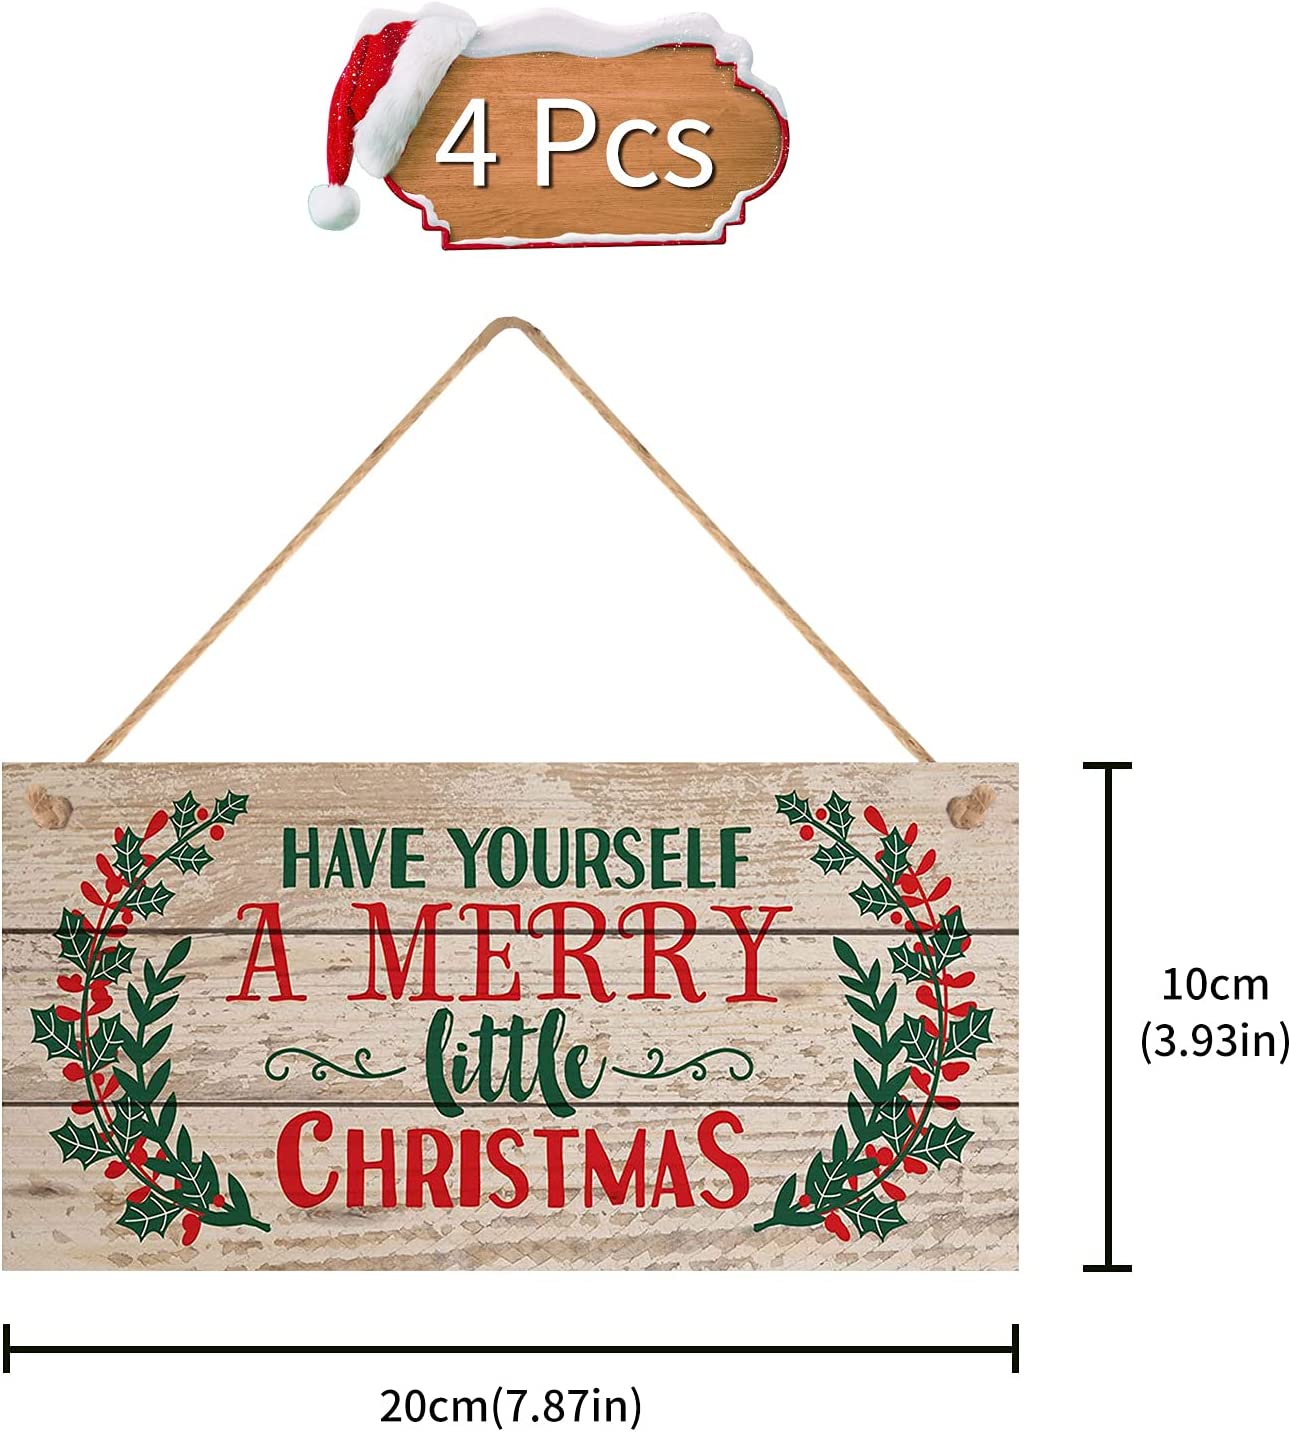 Merry Christmas” Wooden Decorative Signs Set“